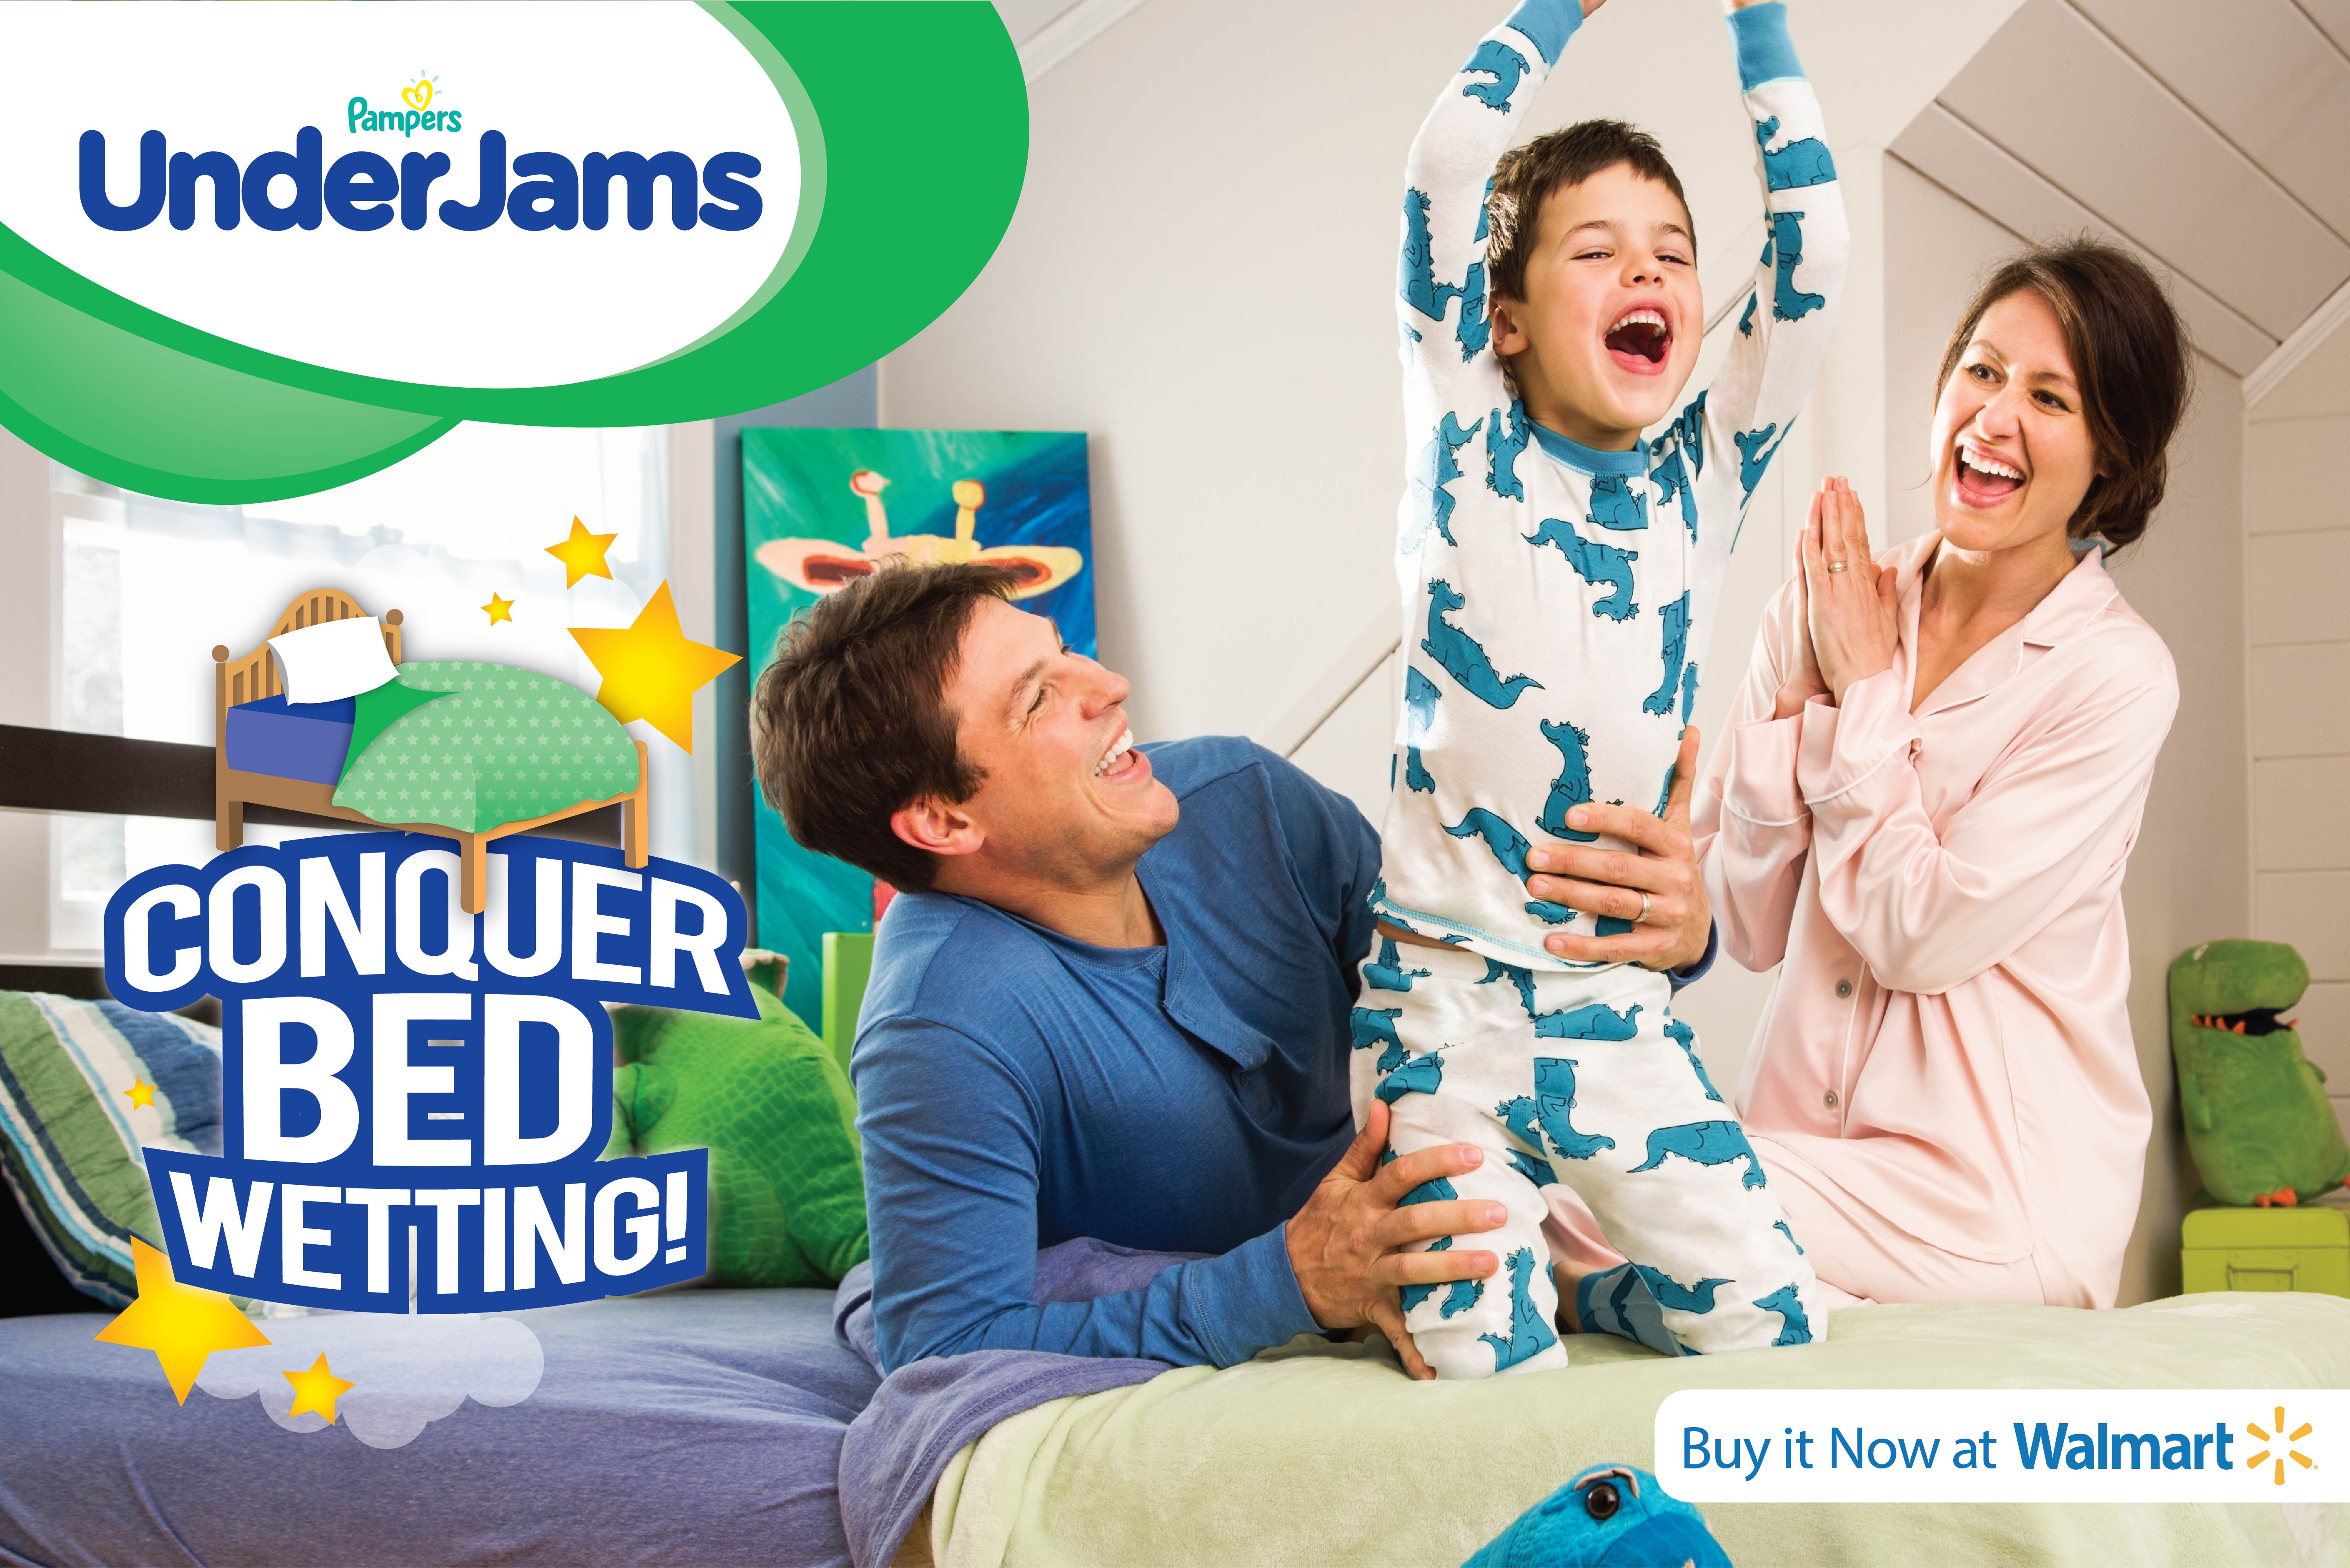 Help Your Child Conquer Bed Wetting with Pampers UnderJams #ConquerBedWetting